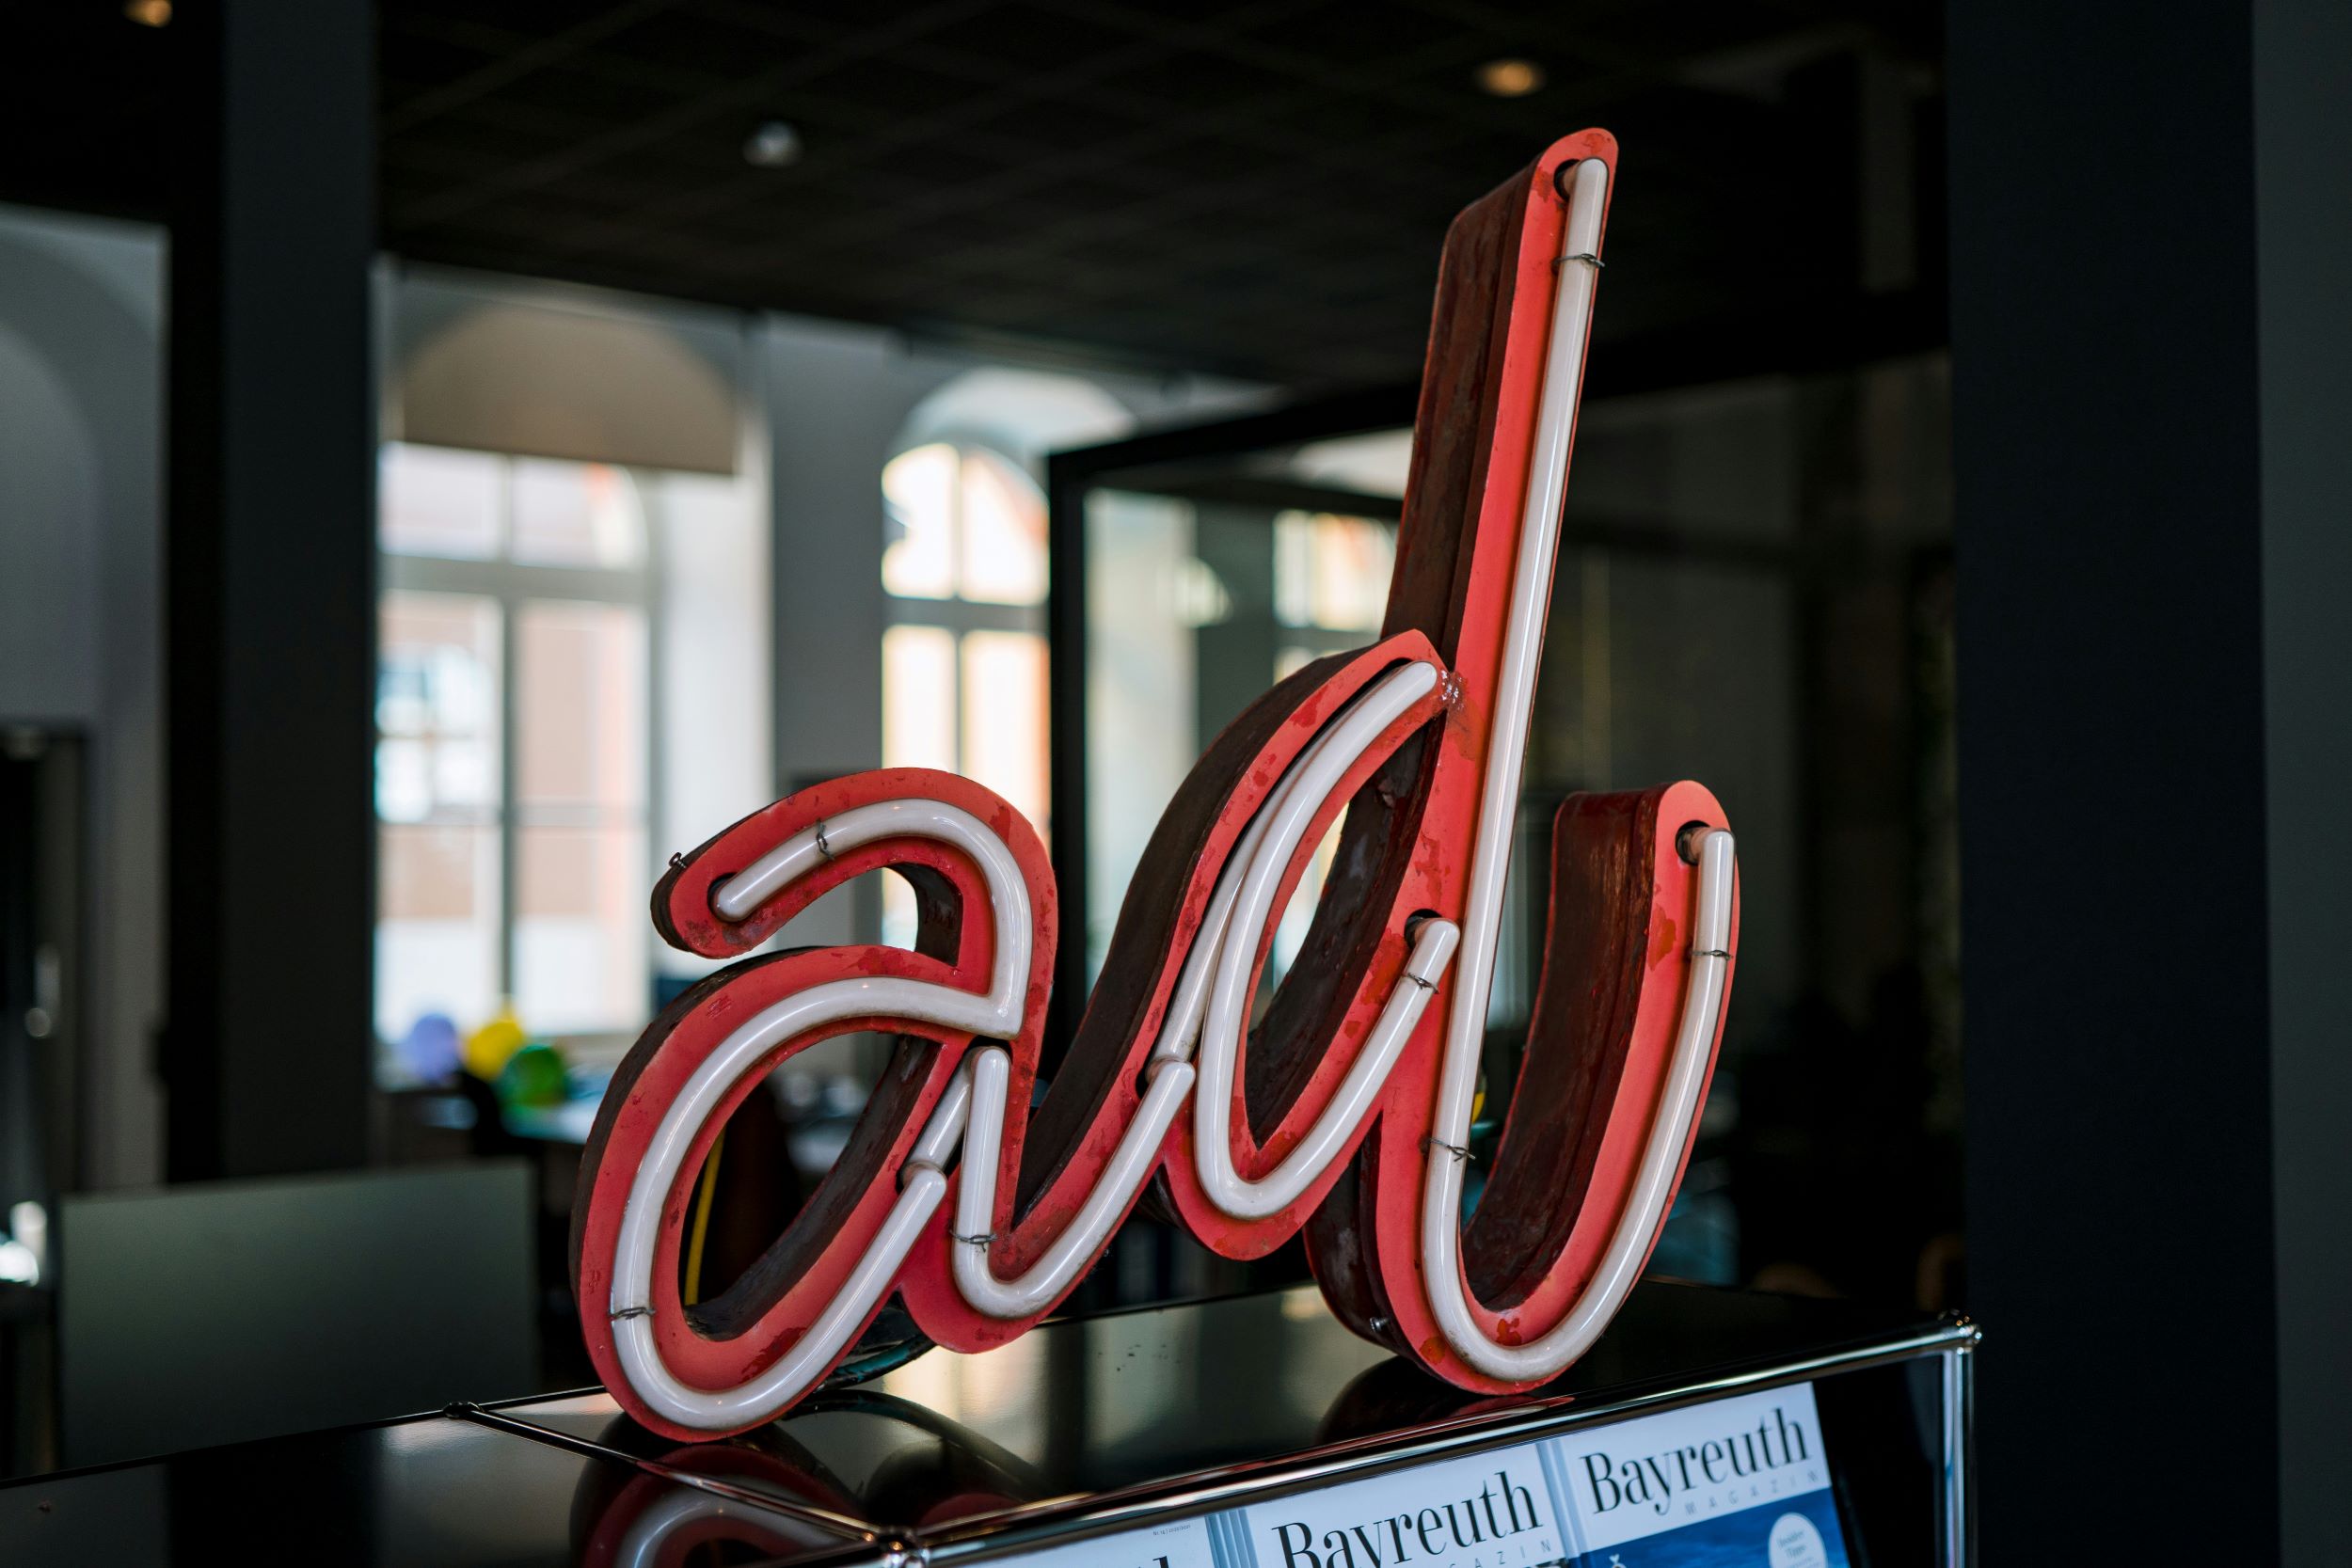 neon sign that says "ad"